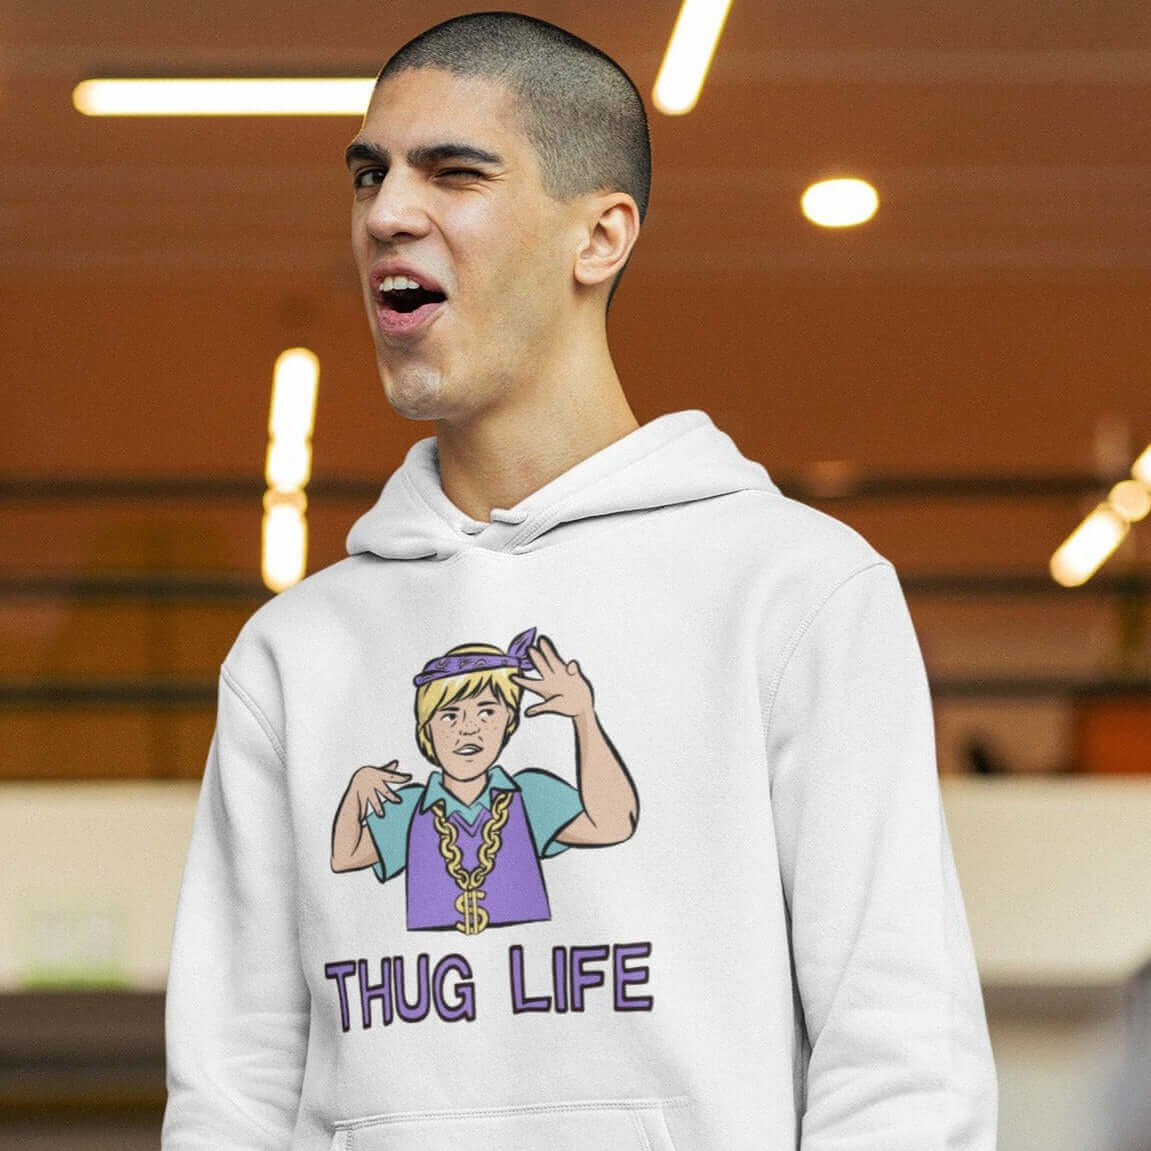 Man laughing wearing a white hoodie sweatshirt with a parody image of a blond haired child trying to be a gangster with the words Thug Life printed on the front.